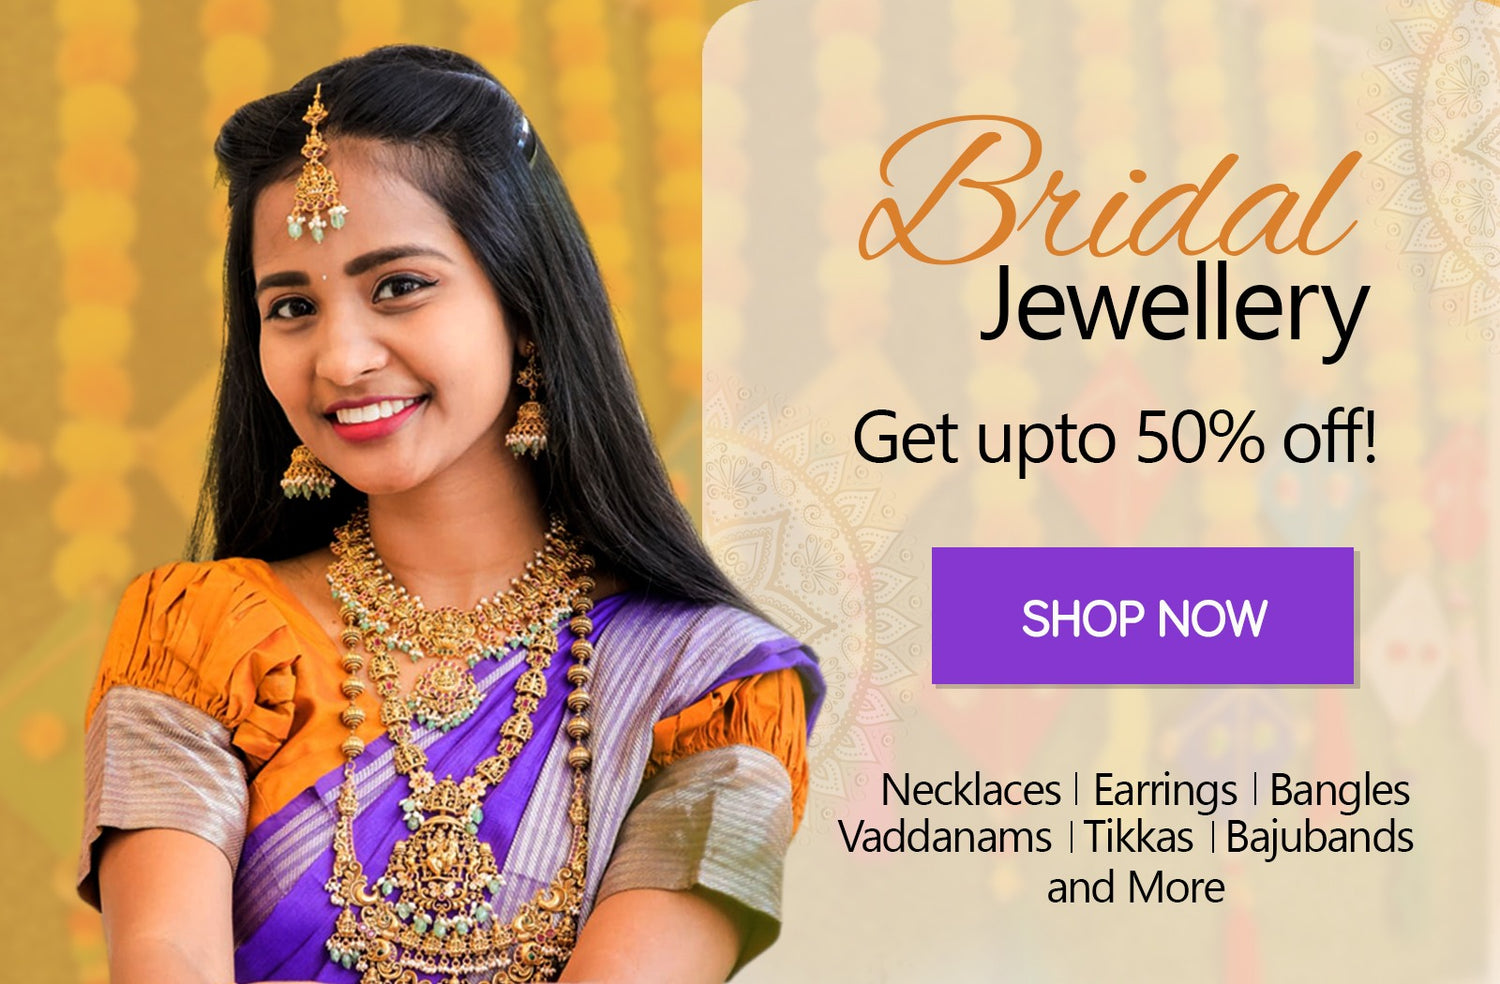 Shop Indian Fashion, Imitation and 1 Gram Gold Jewellery Online ...